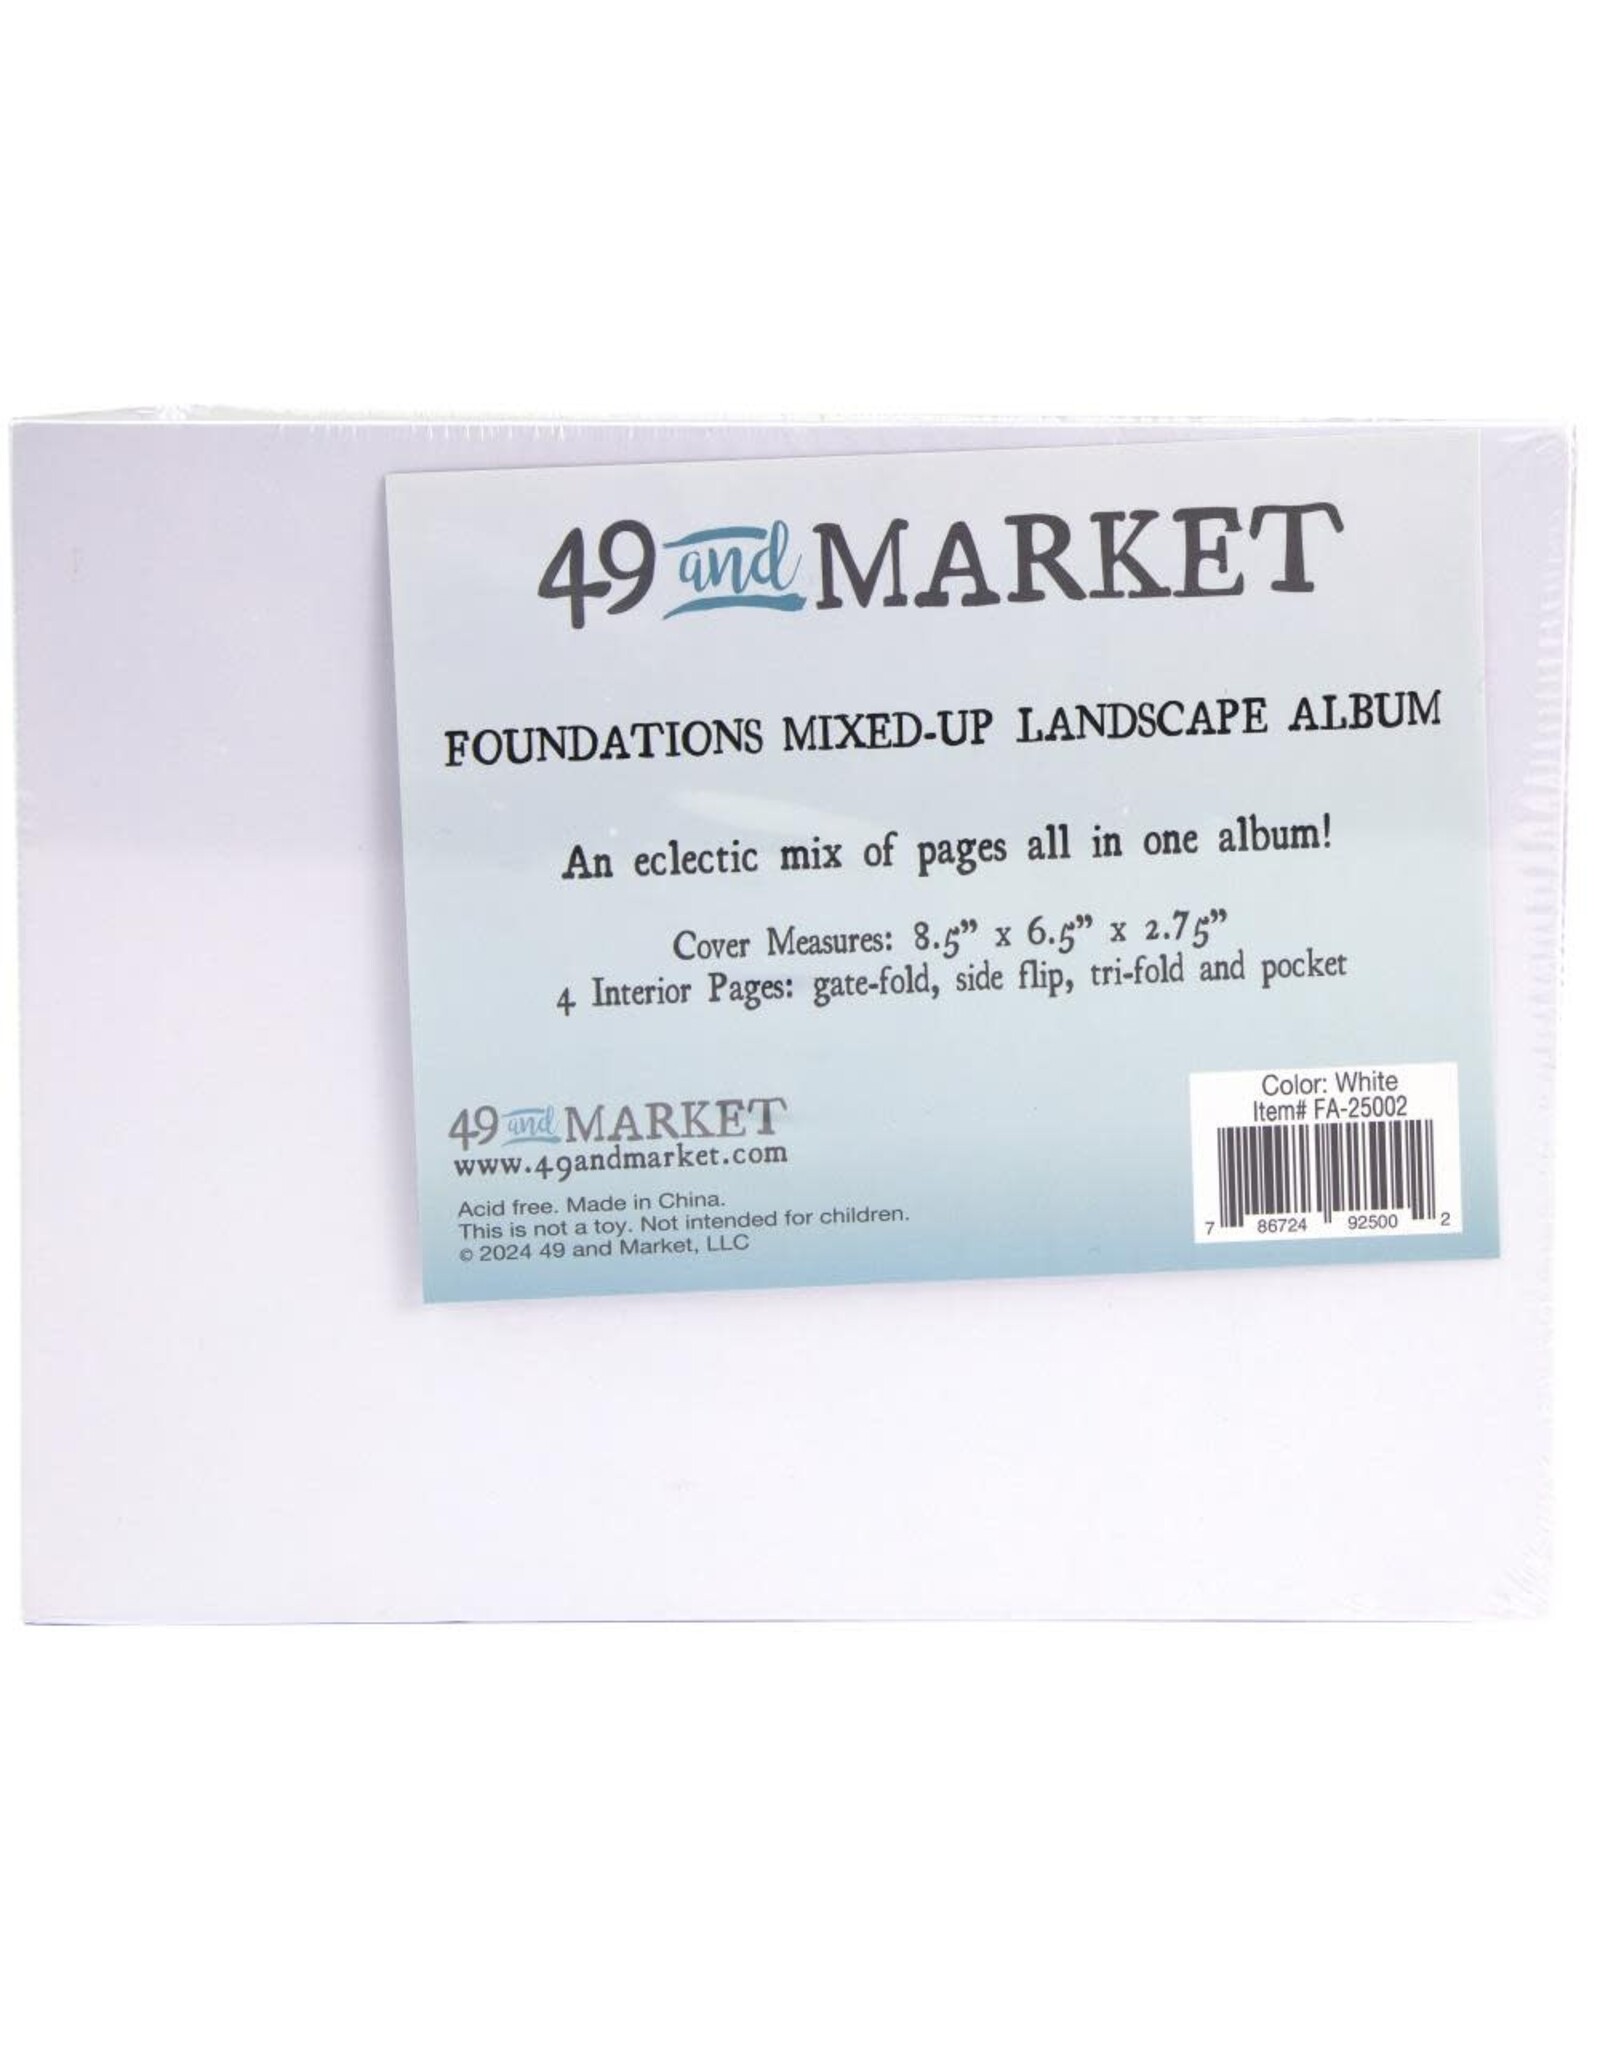 49 AND MARKET 49 AND MARKET WHITE FOUNDATIONS LANDSCAPE MIXED-UP 8.5x6.5 ALBUM